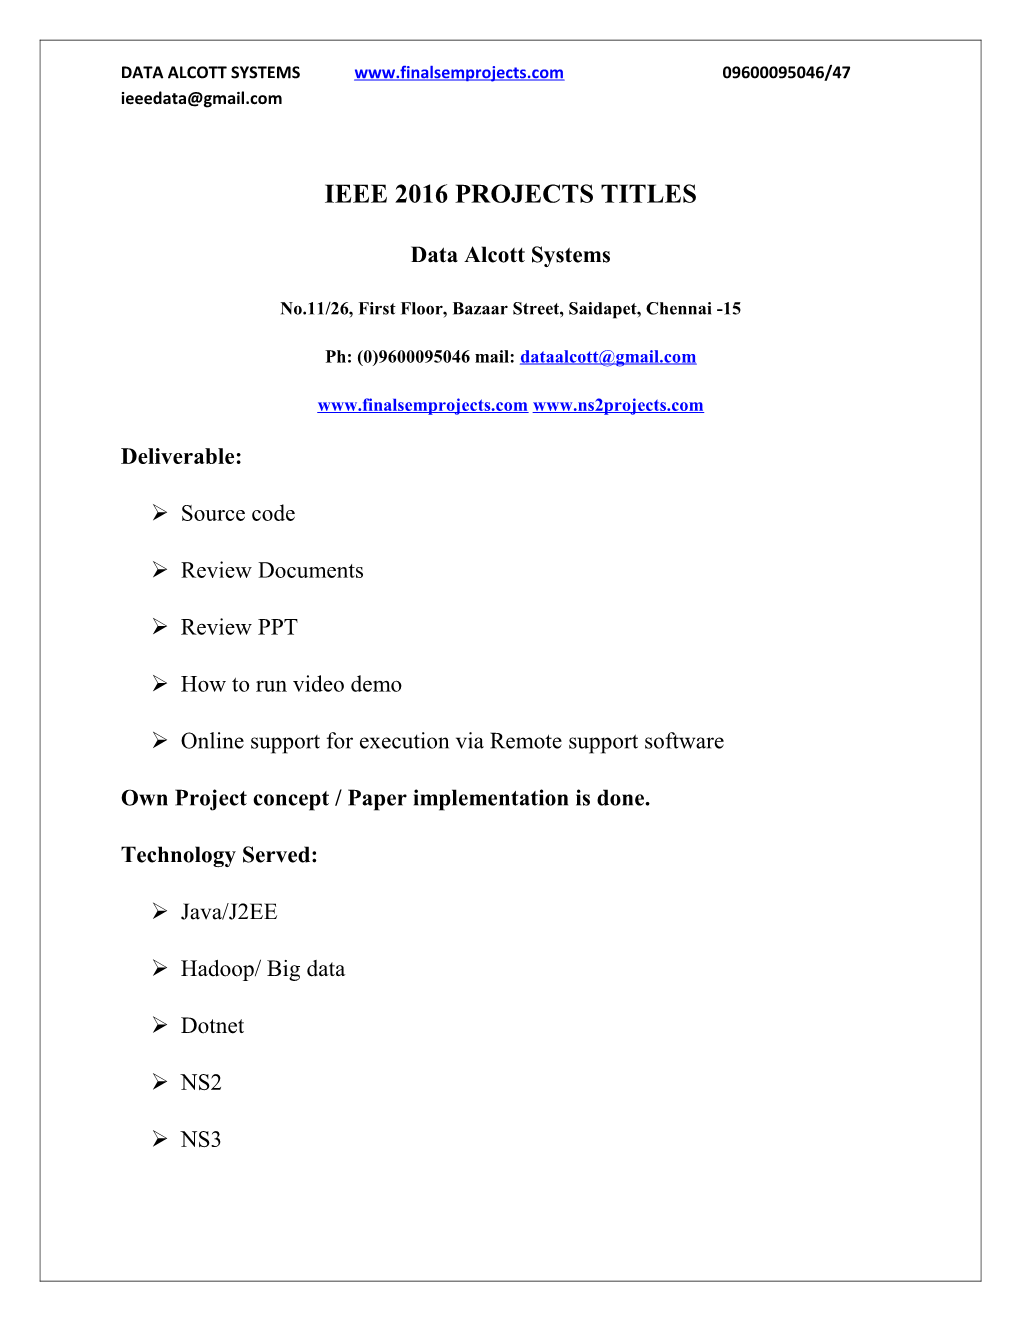 Ieee 2016 Projects Titles